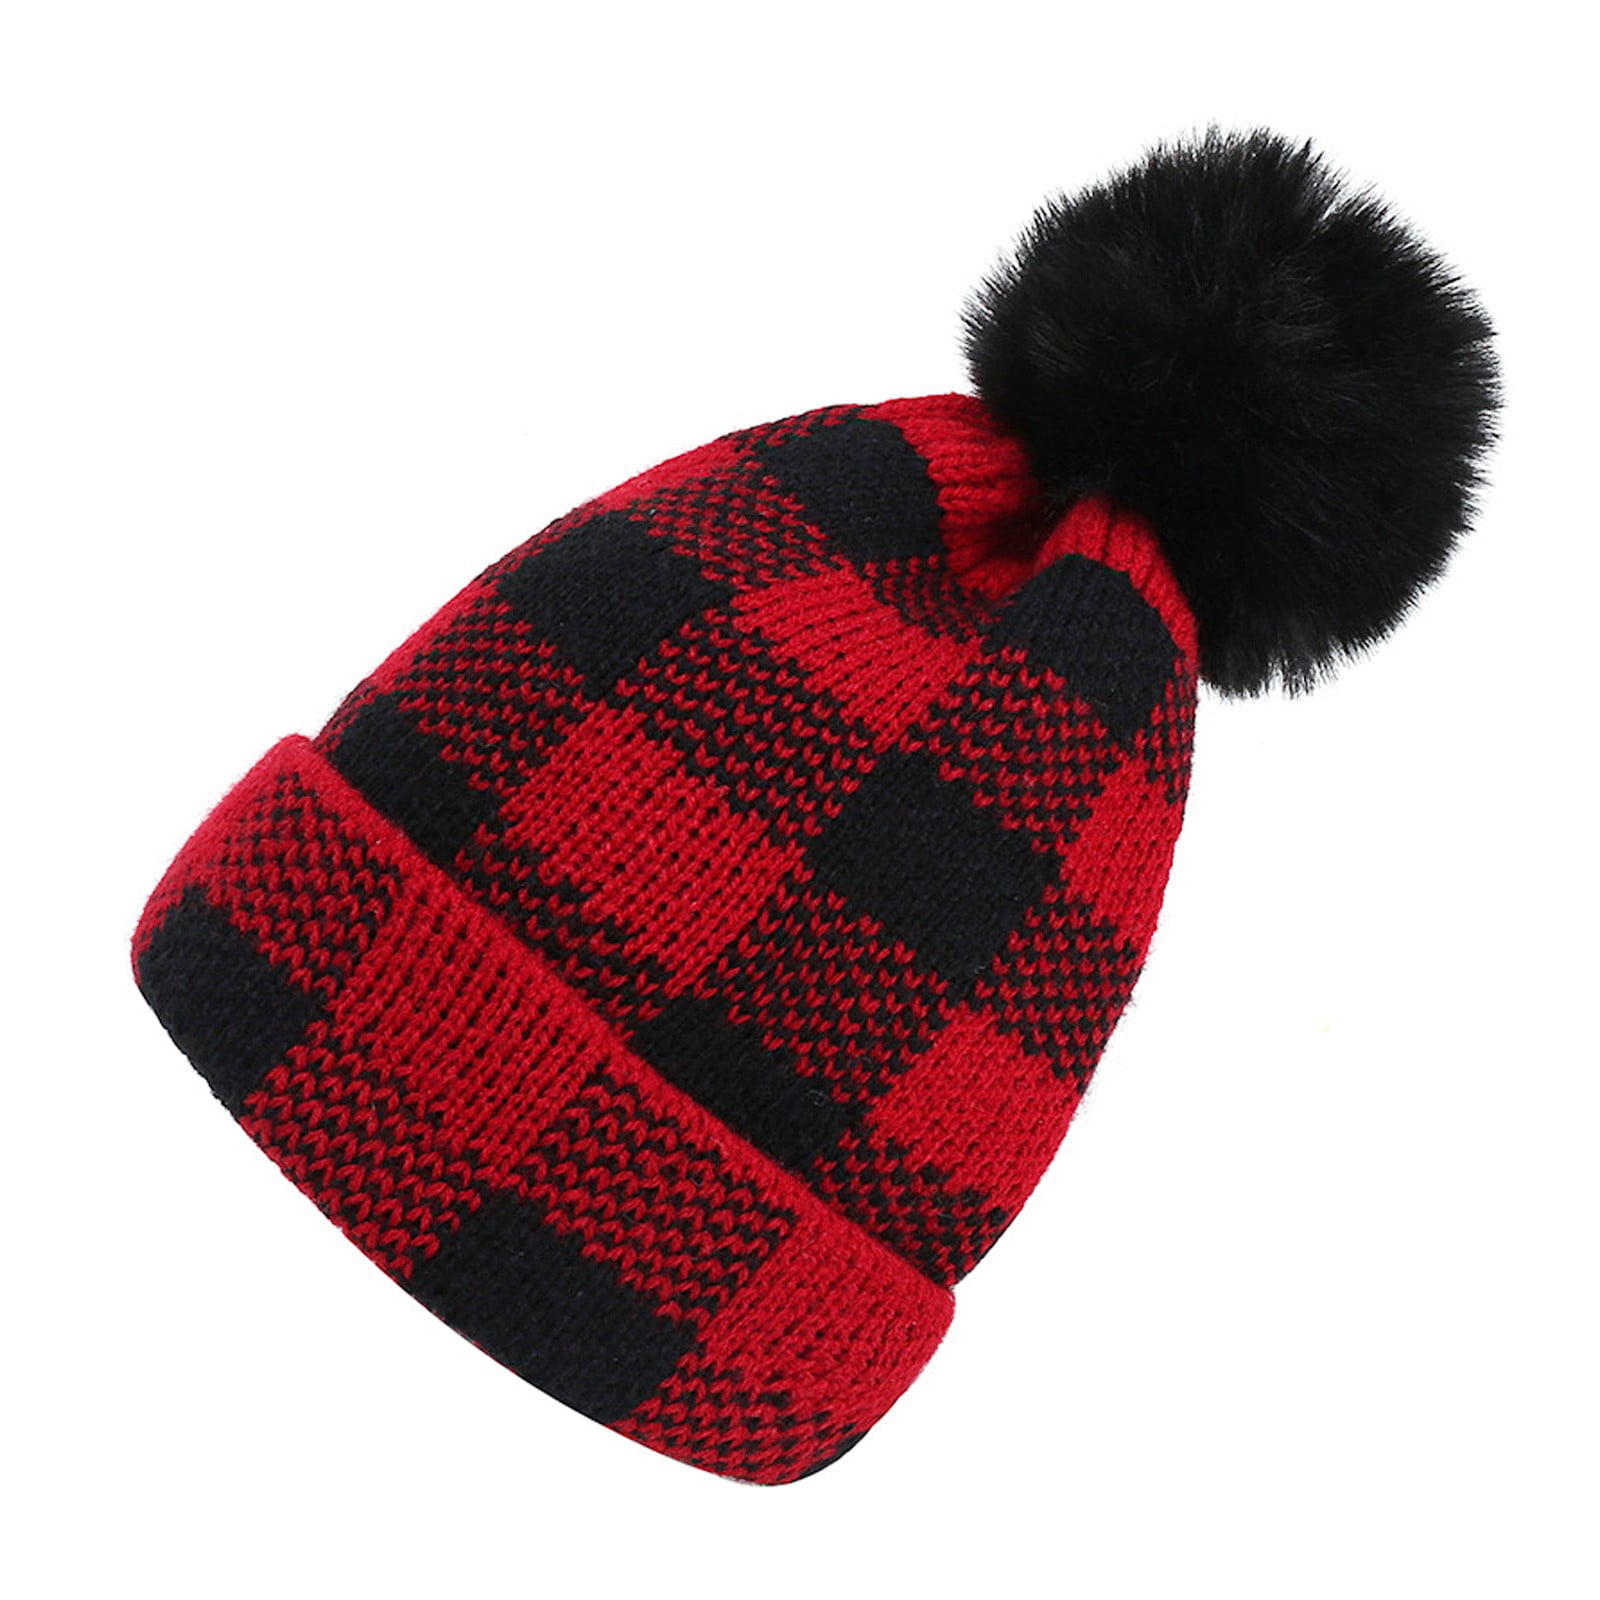 Thick Slouchy Snow Knit Skull Ski Cap Women Winter Beanie Hat with Warm Lined 